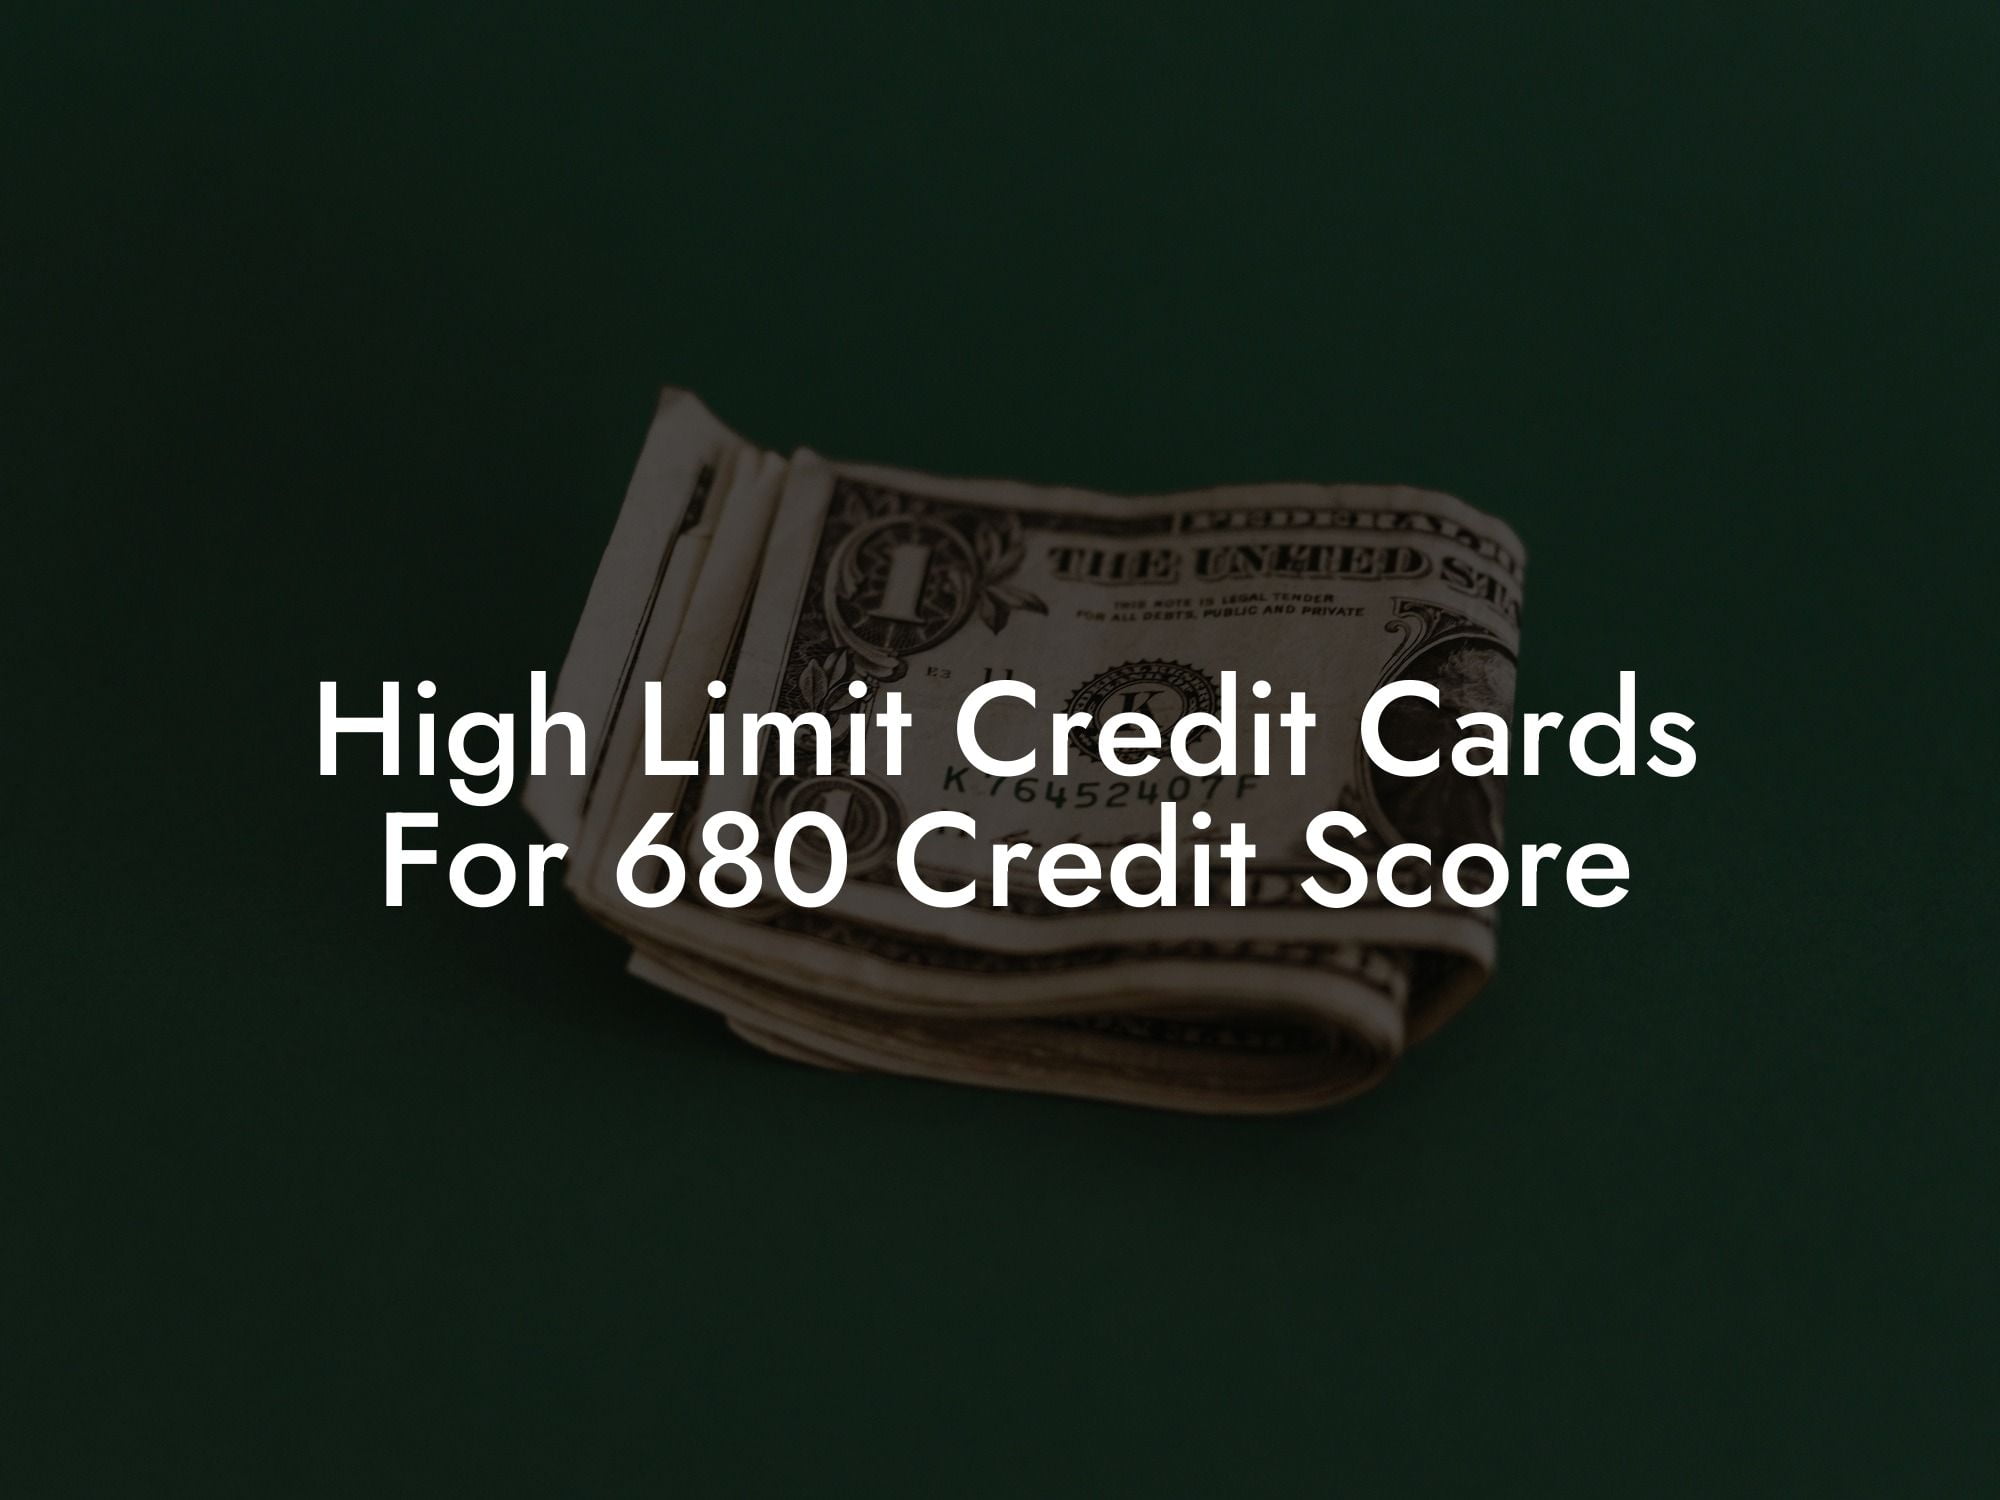 High Limit Credit Cards For 680 Credit Score